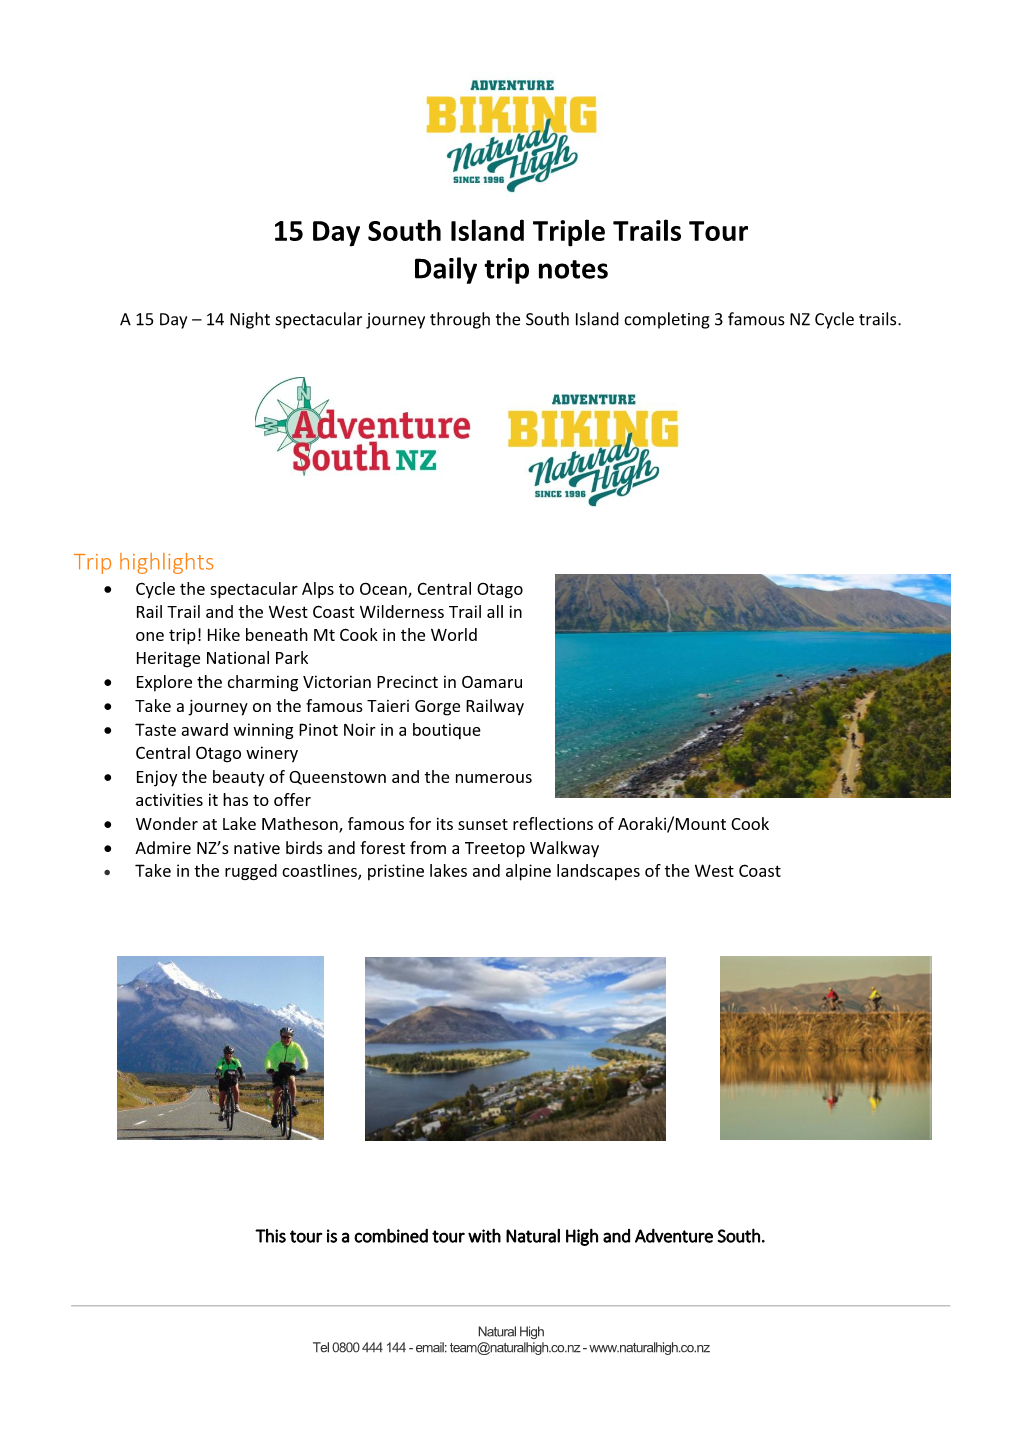 15 Day South Island Triple Trails Tour Daily Trip Notes